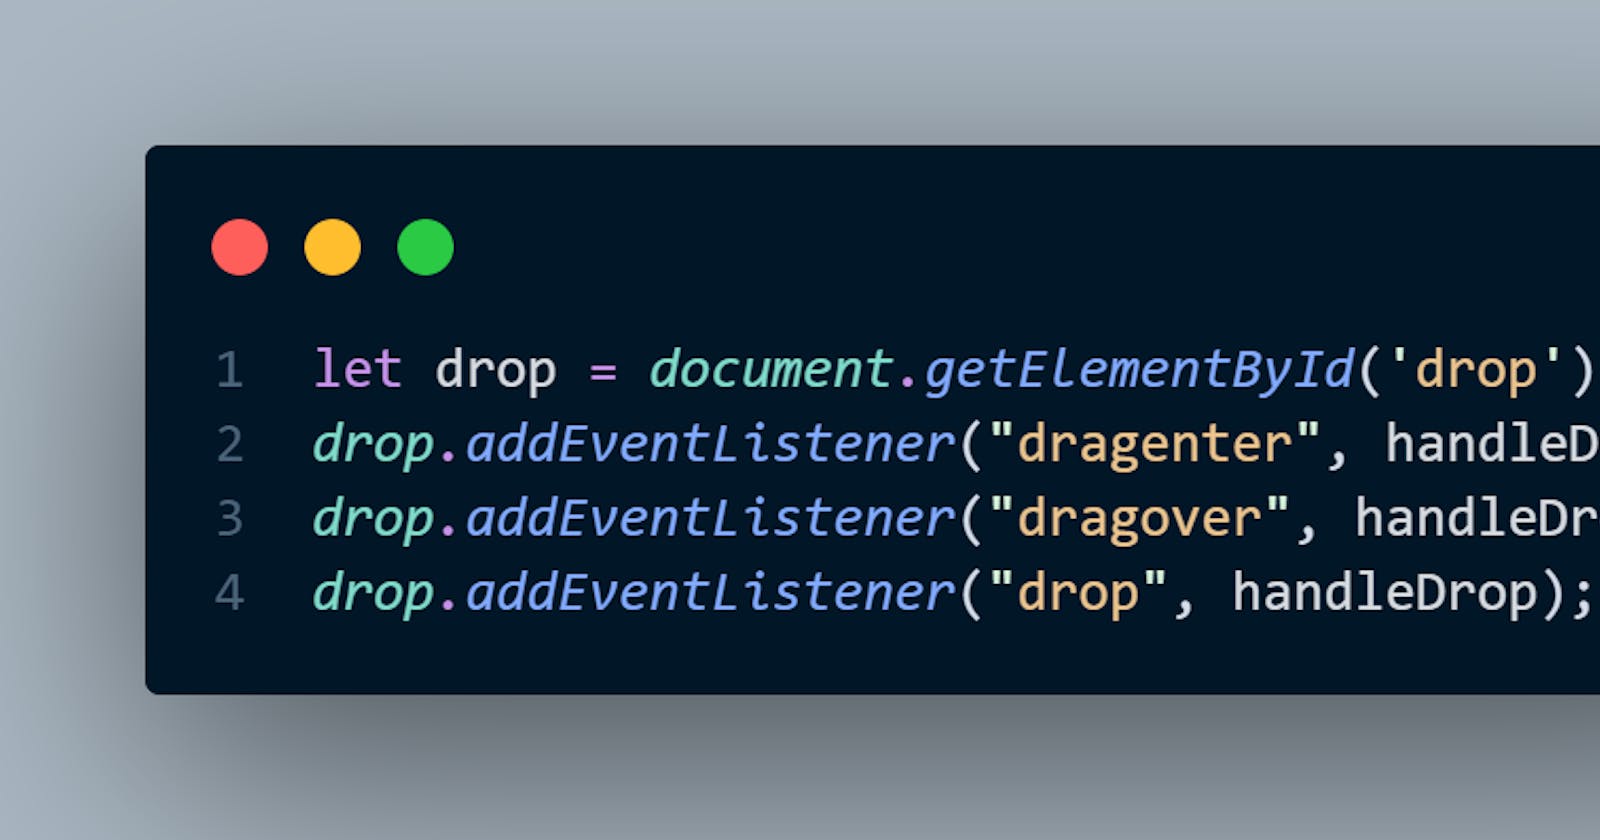 How to create a drag and drop file reader/uploader